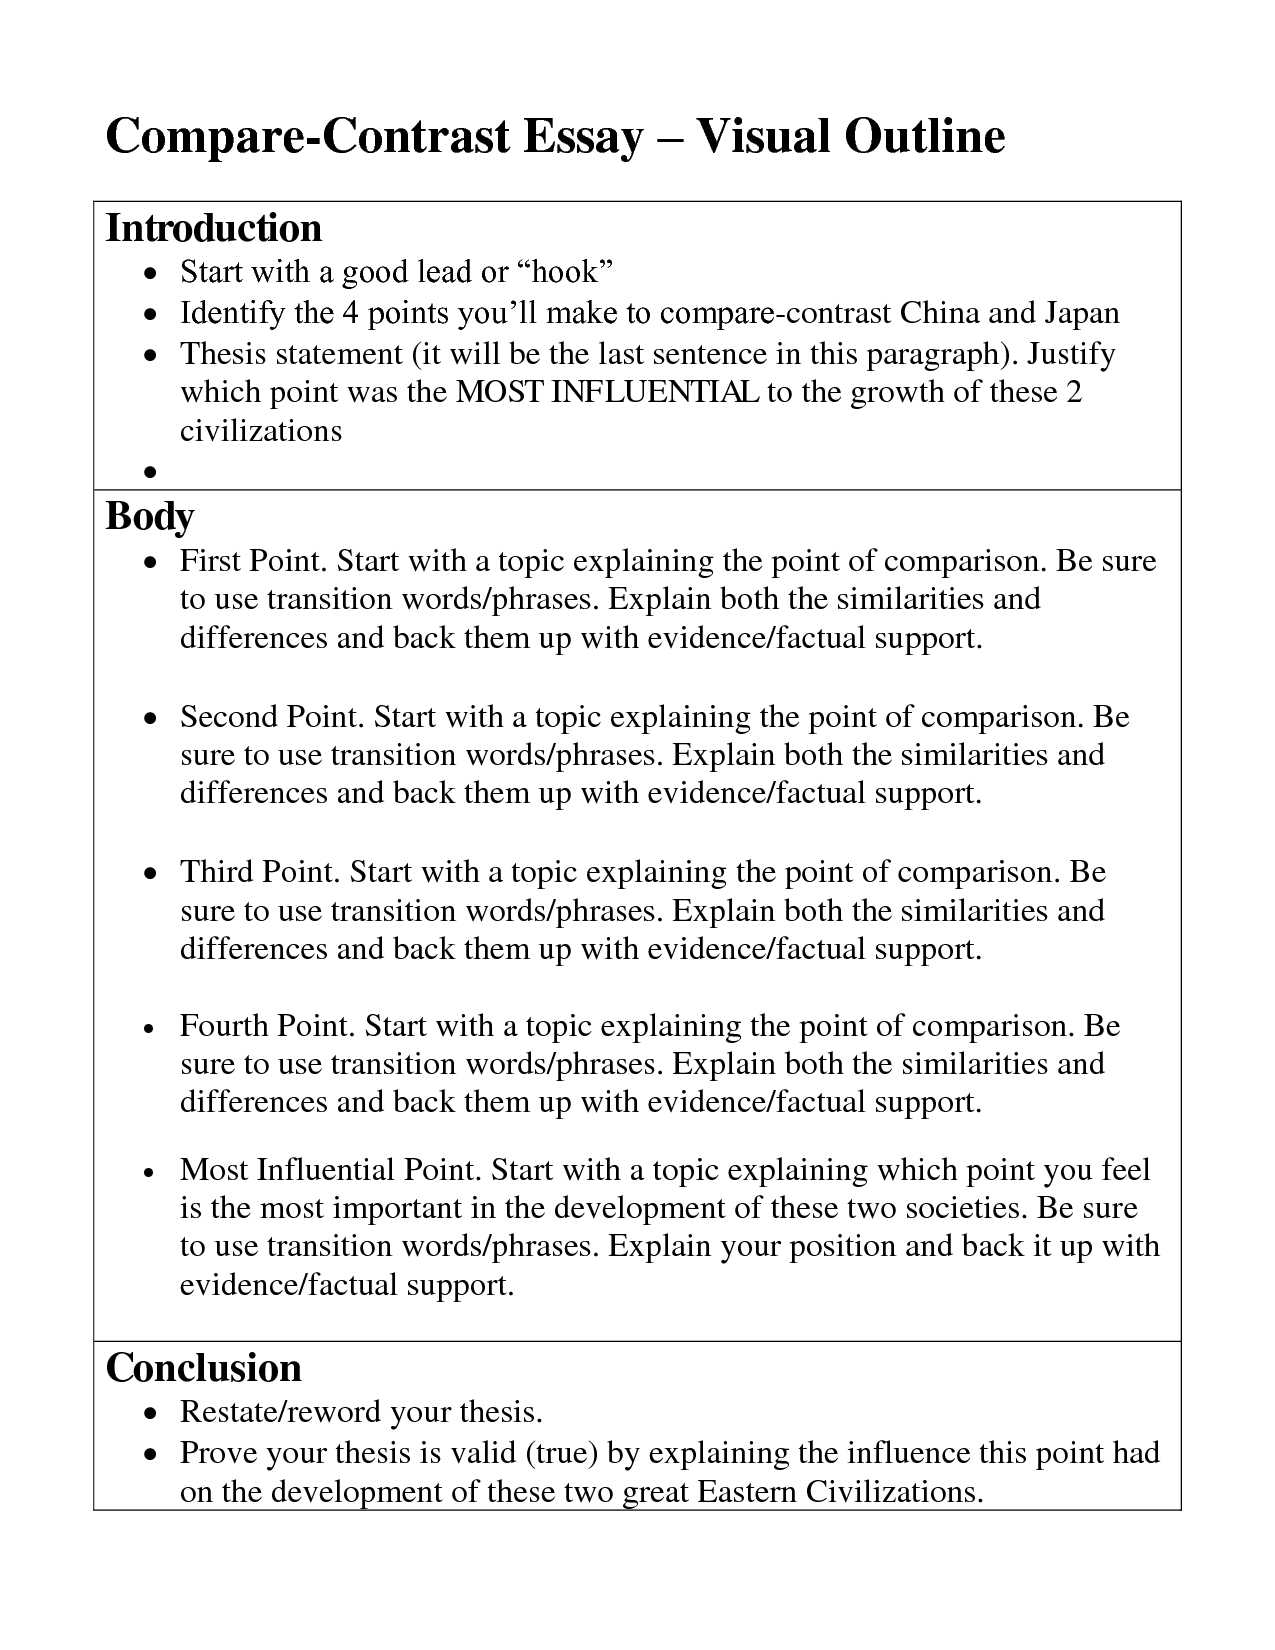 Citizenship In the Community Worksheet together with Essay Search Engine Controversial Essay topics for College Students